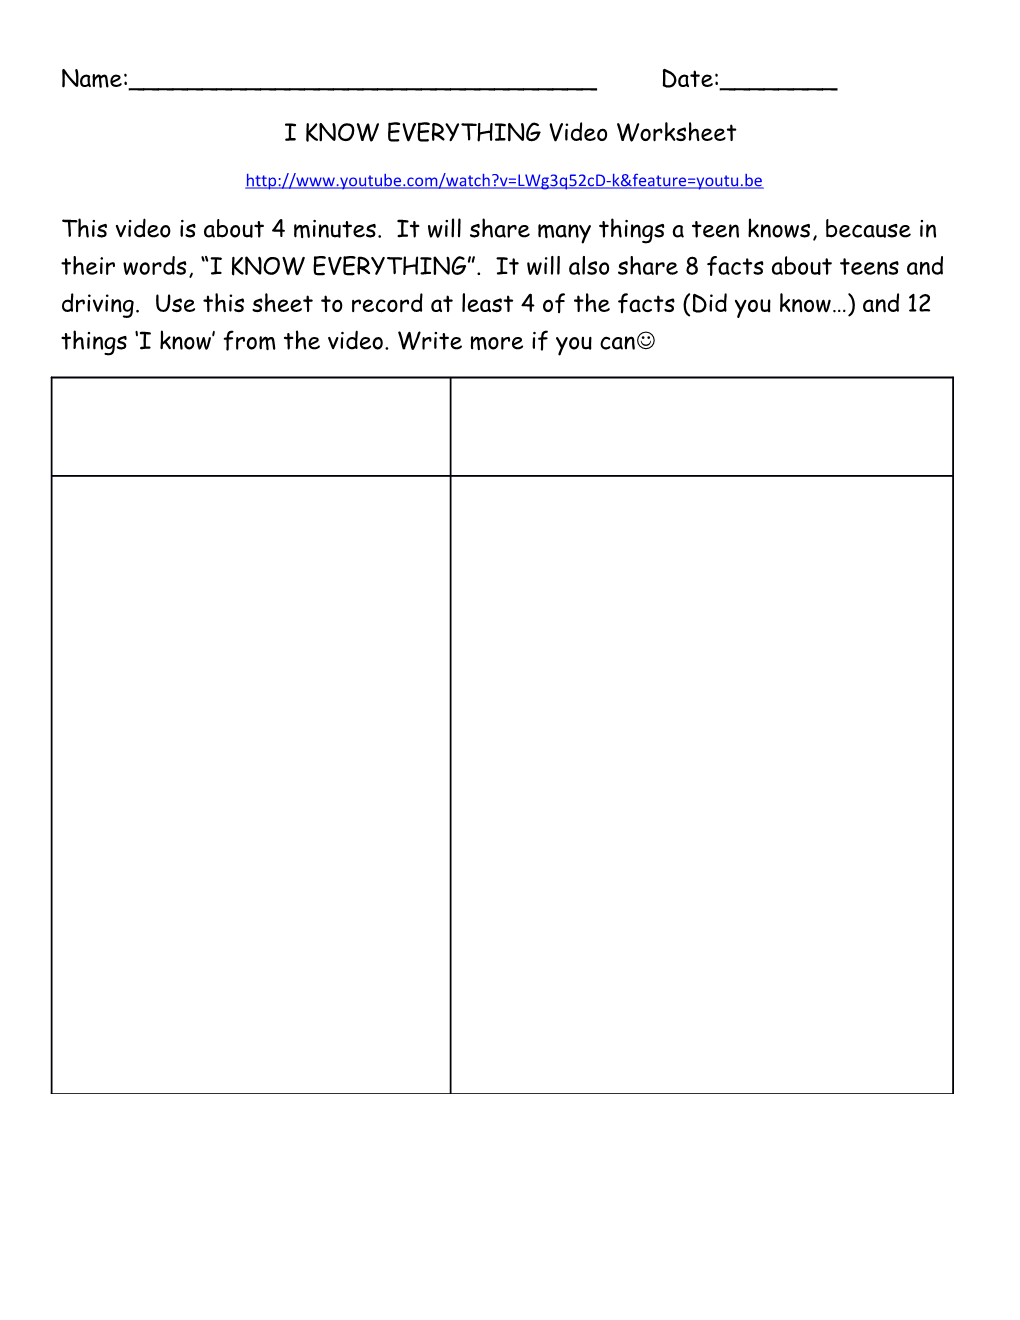 I KNOW EVERYTHING Video Worksheet